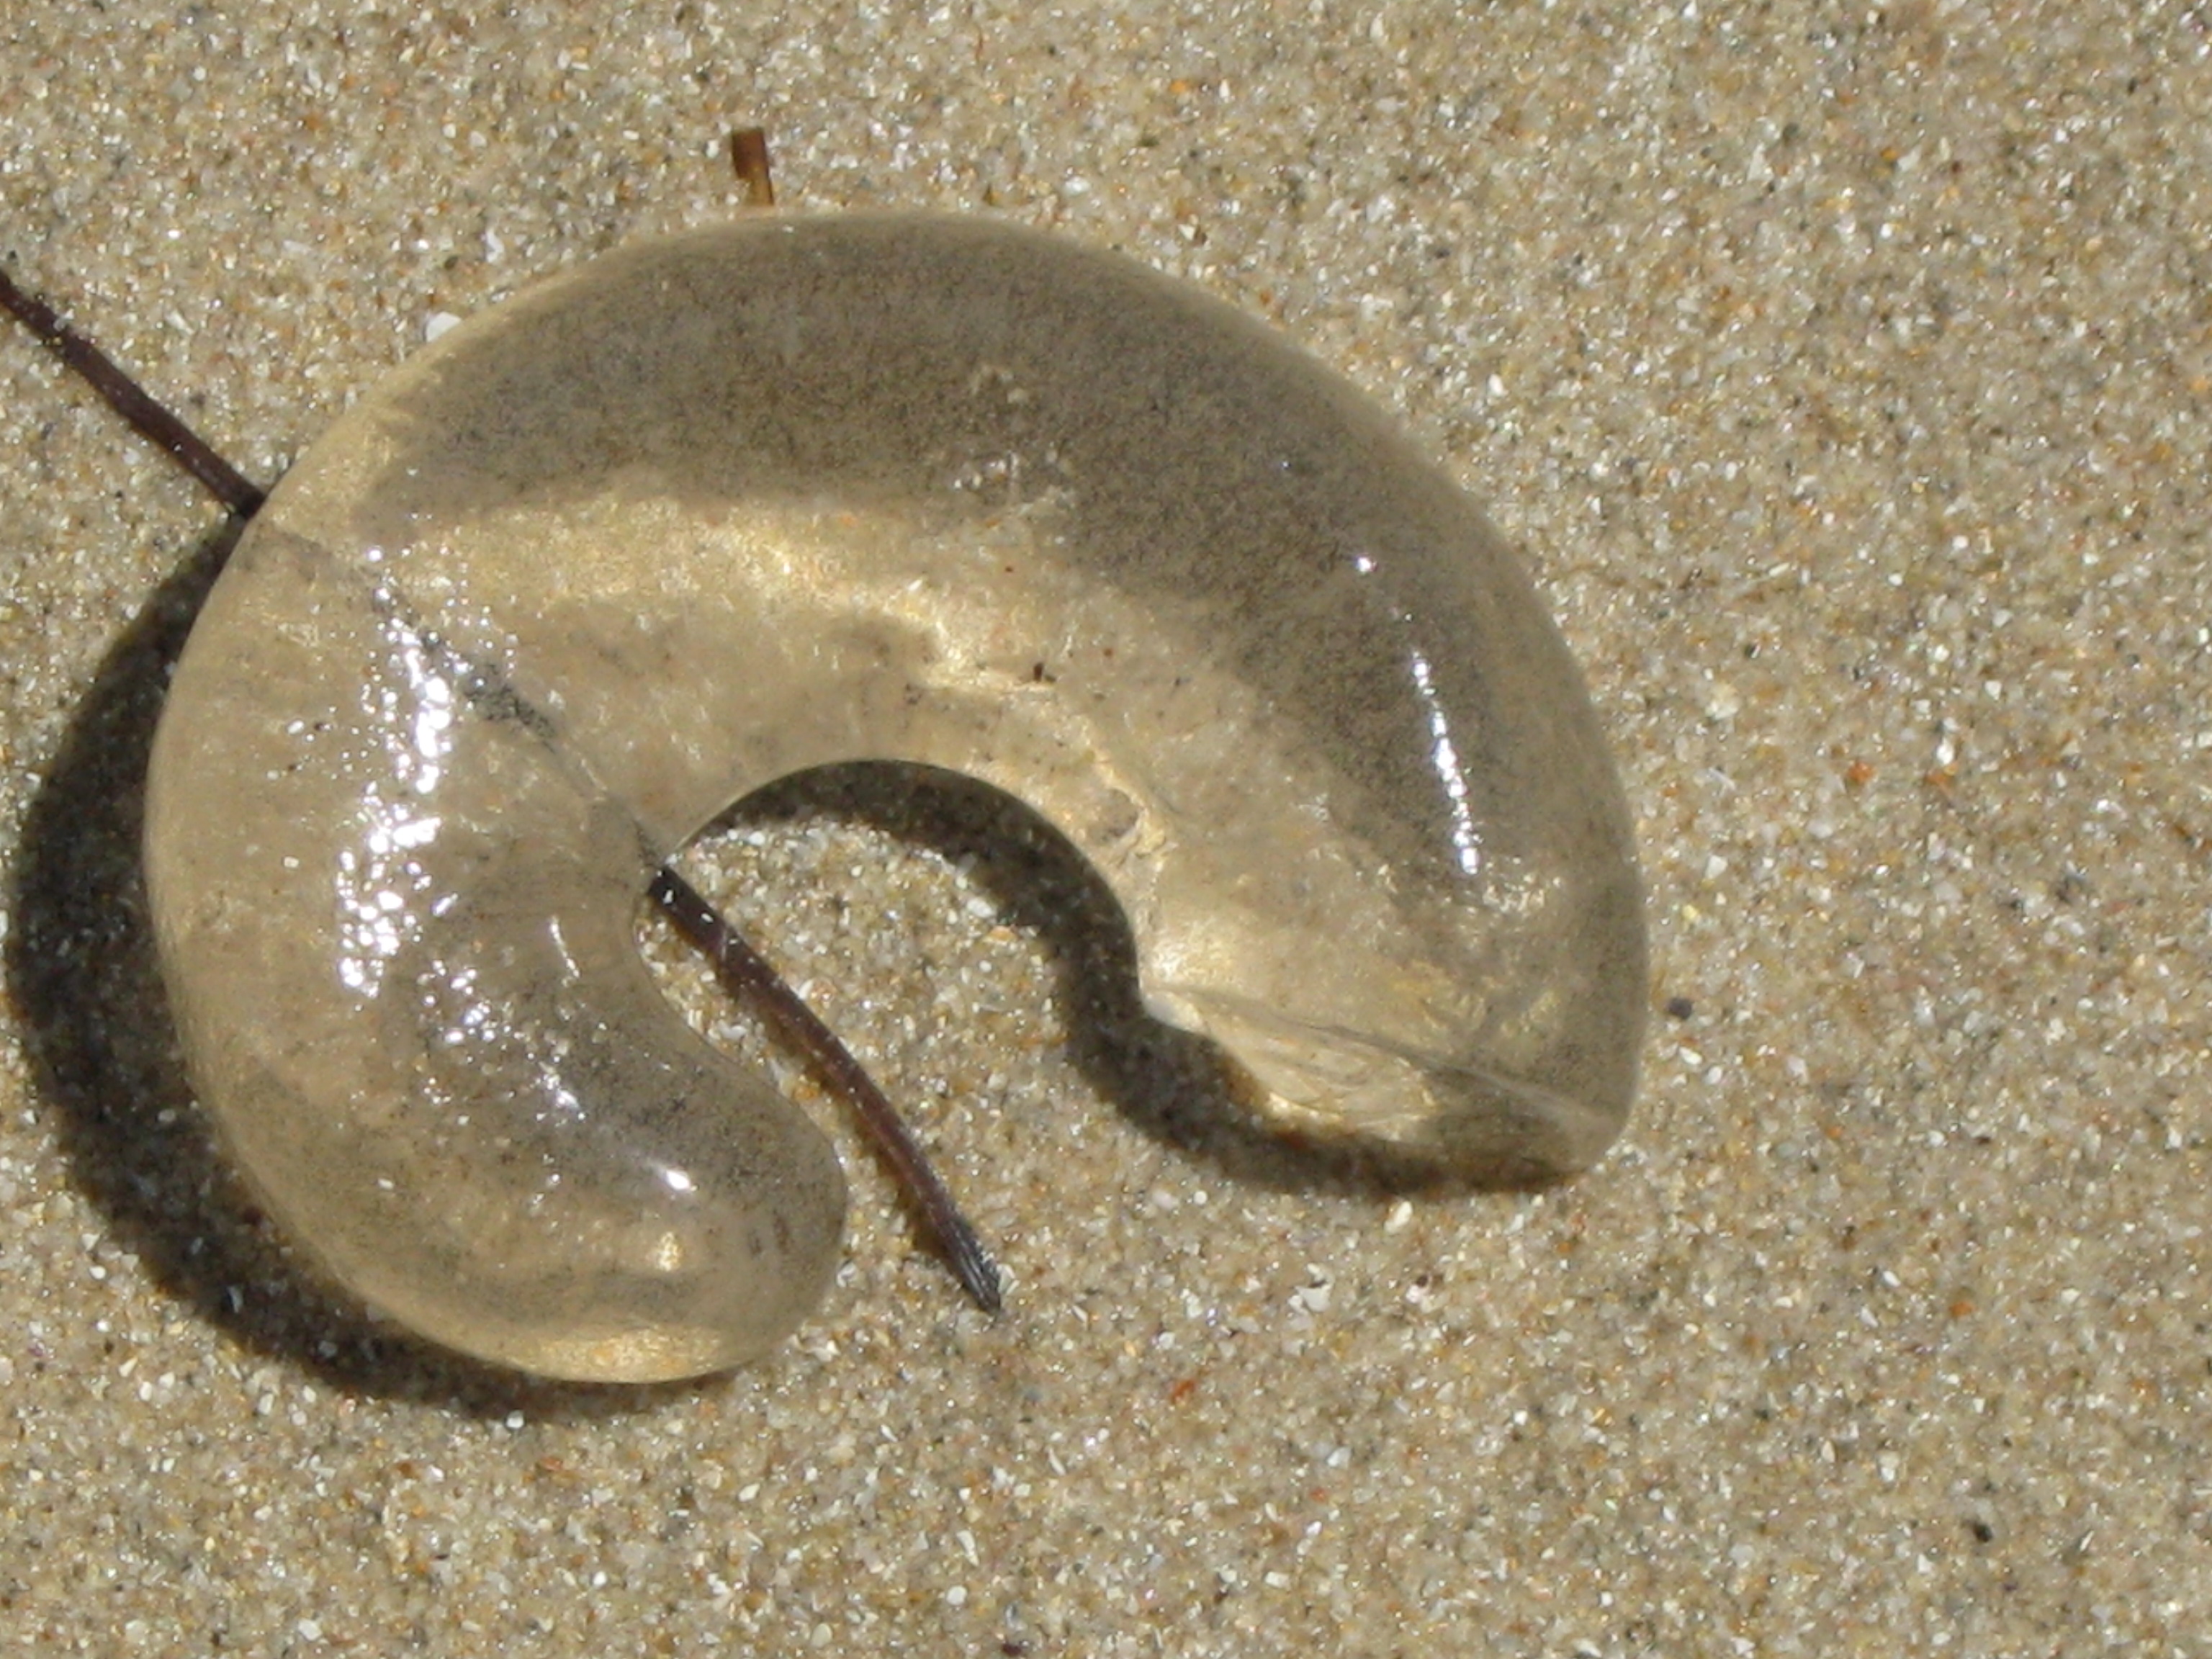 Squishy things on the beach | The Resident Judge of Port Phillip